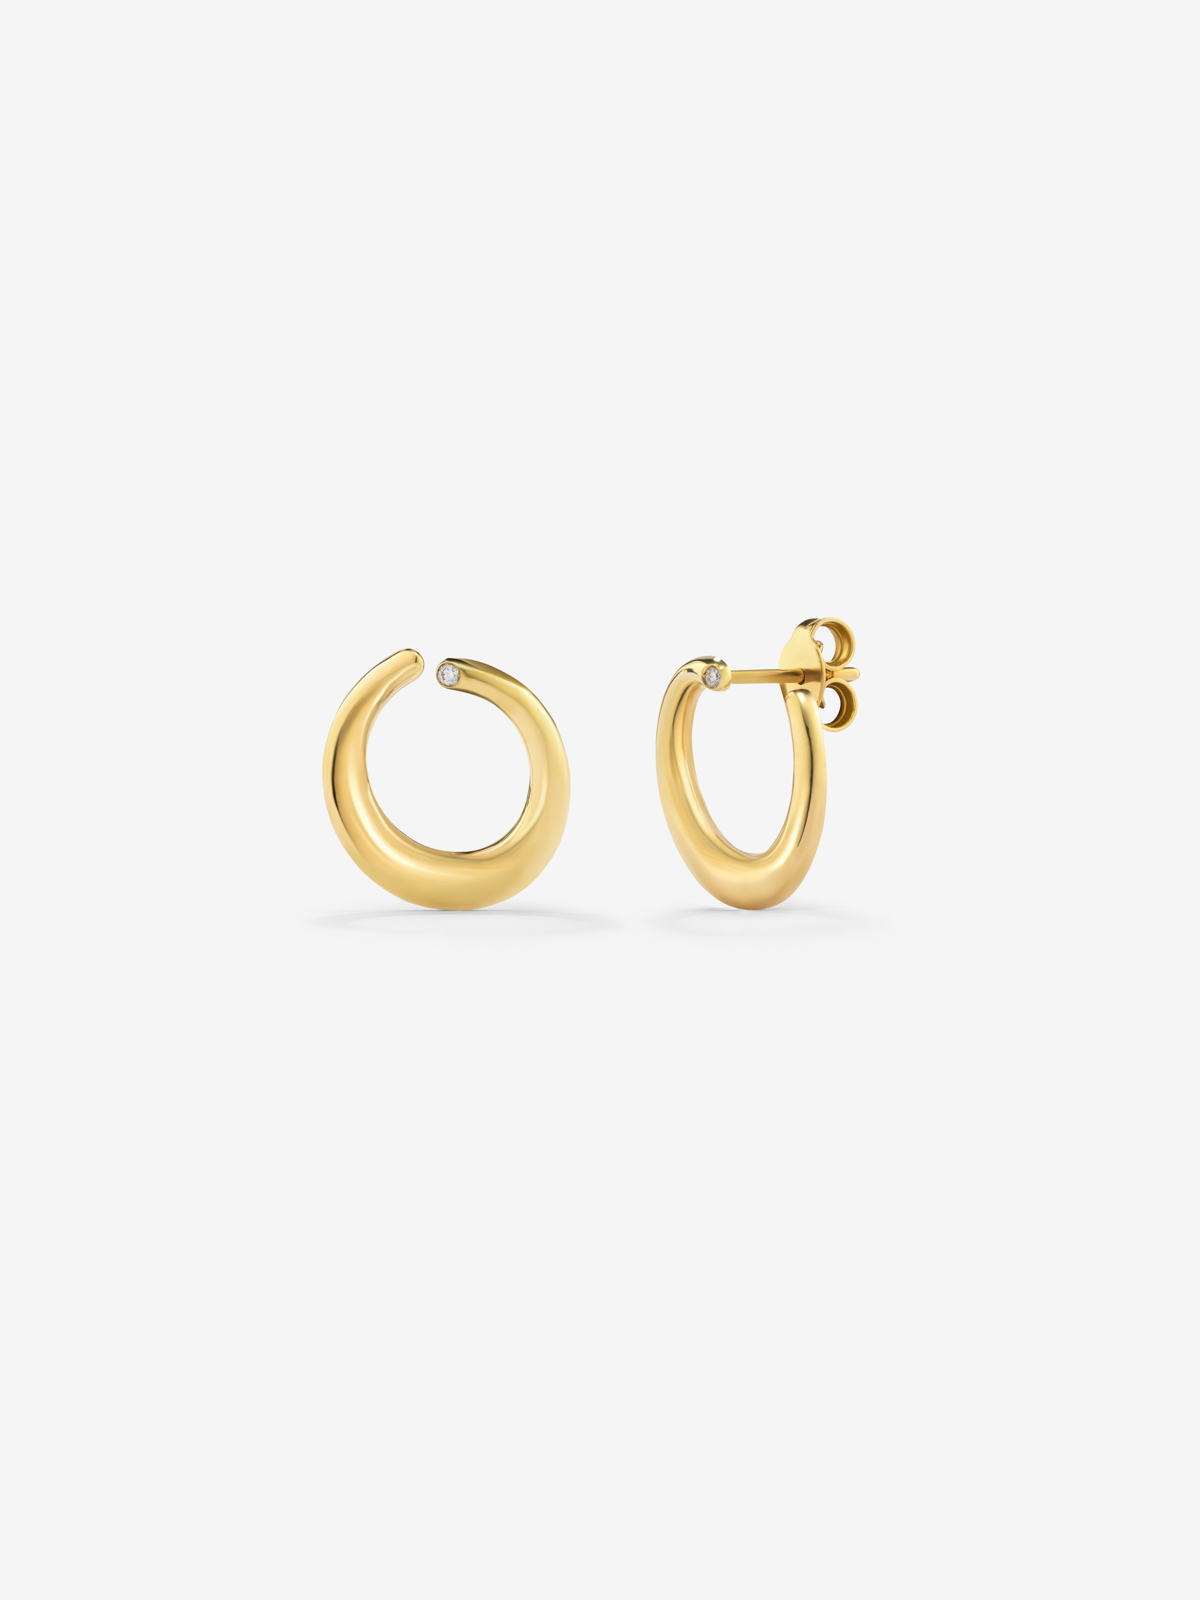 Small and 18k yellow gold smooth slopes with diamond